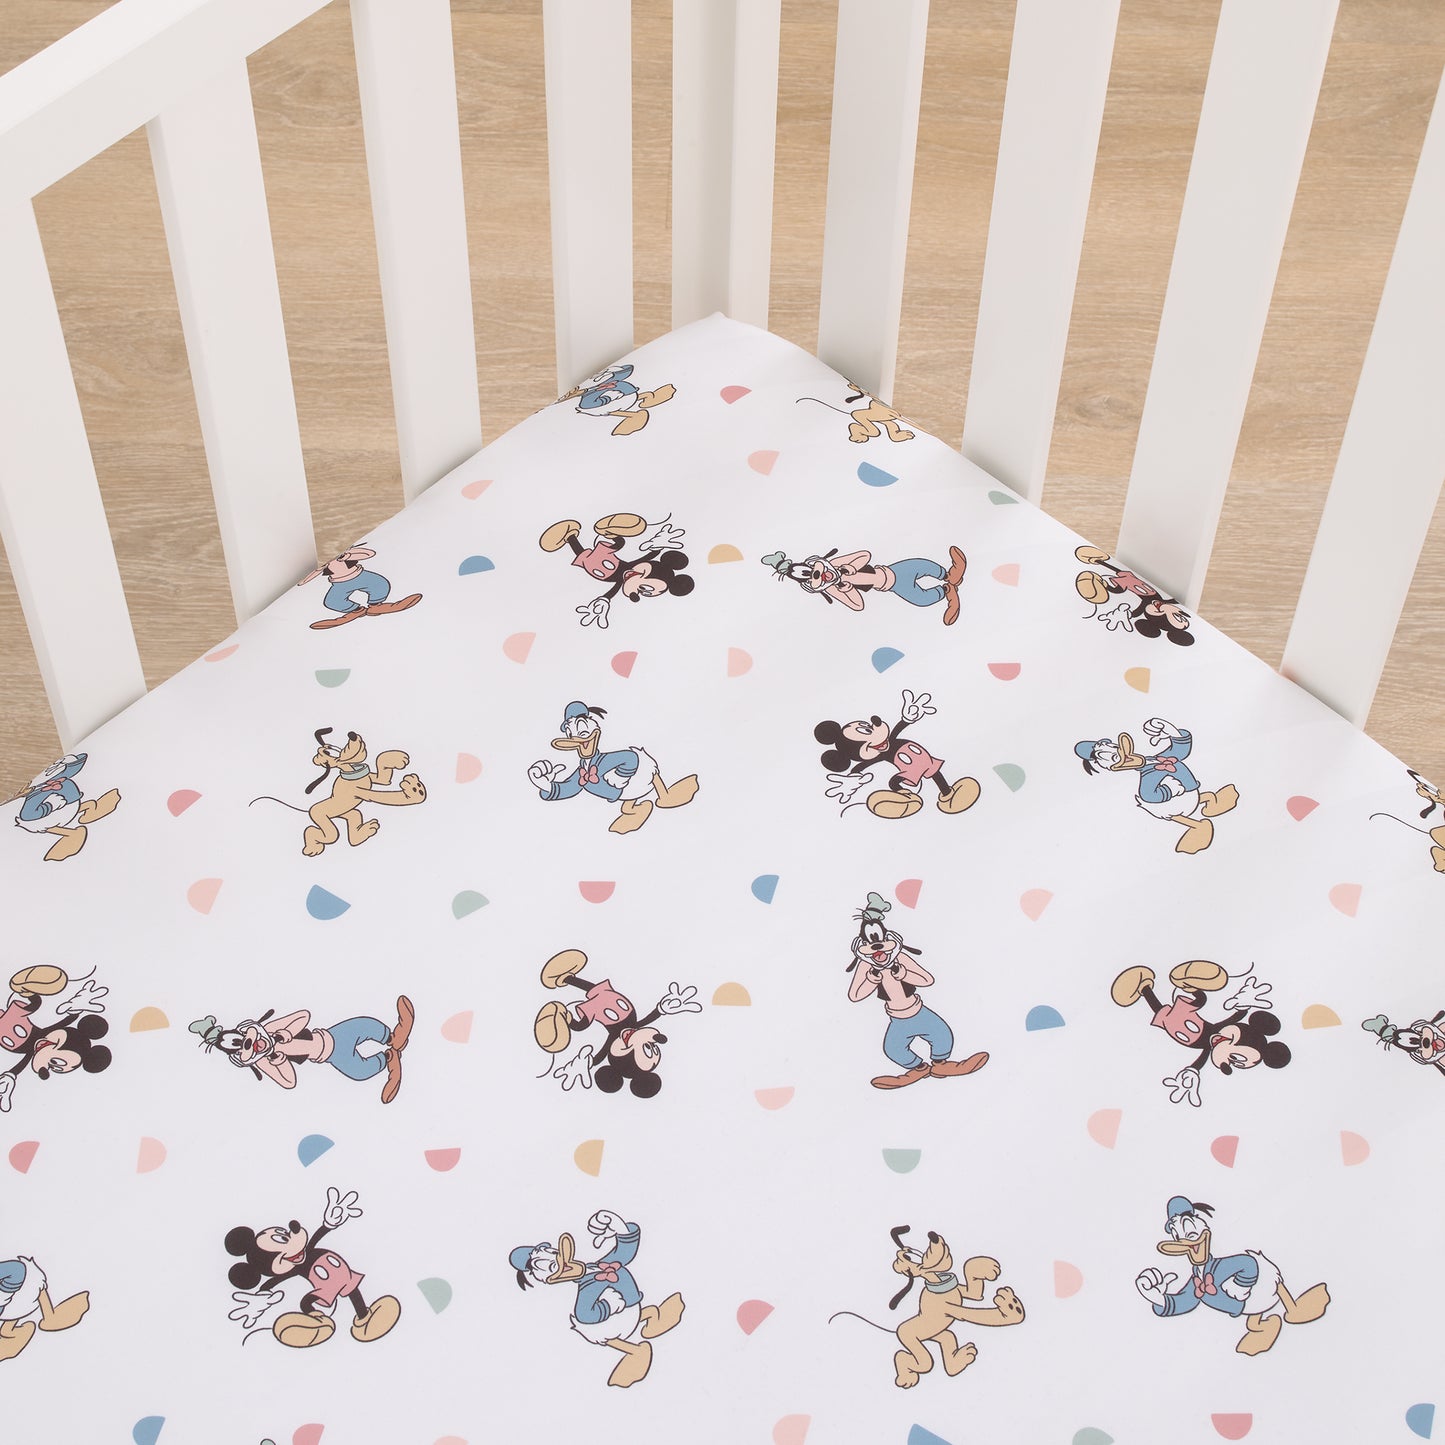 Disney Mickey Mouse Light Blue, White, and Tan Donald Duck, Goofy, and Pluto Super Soft Nursery Fitted Crib Sheet